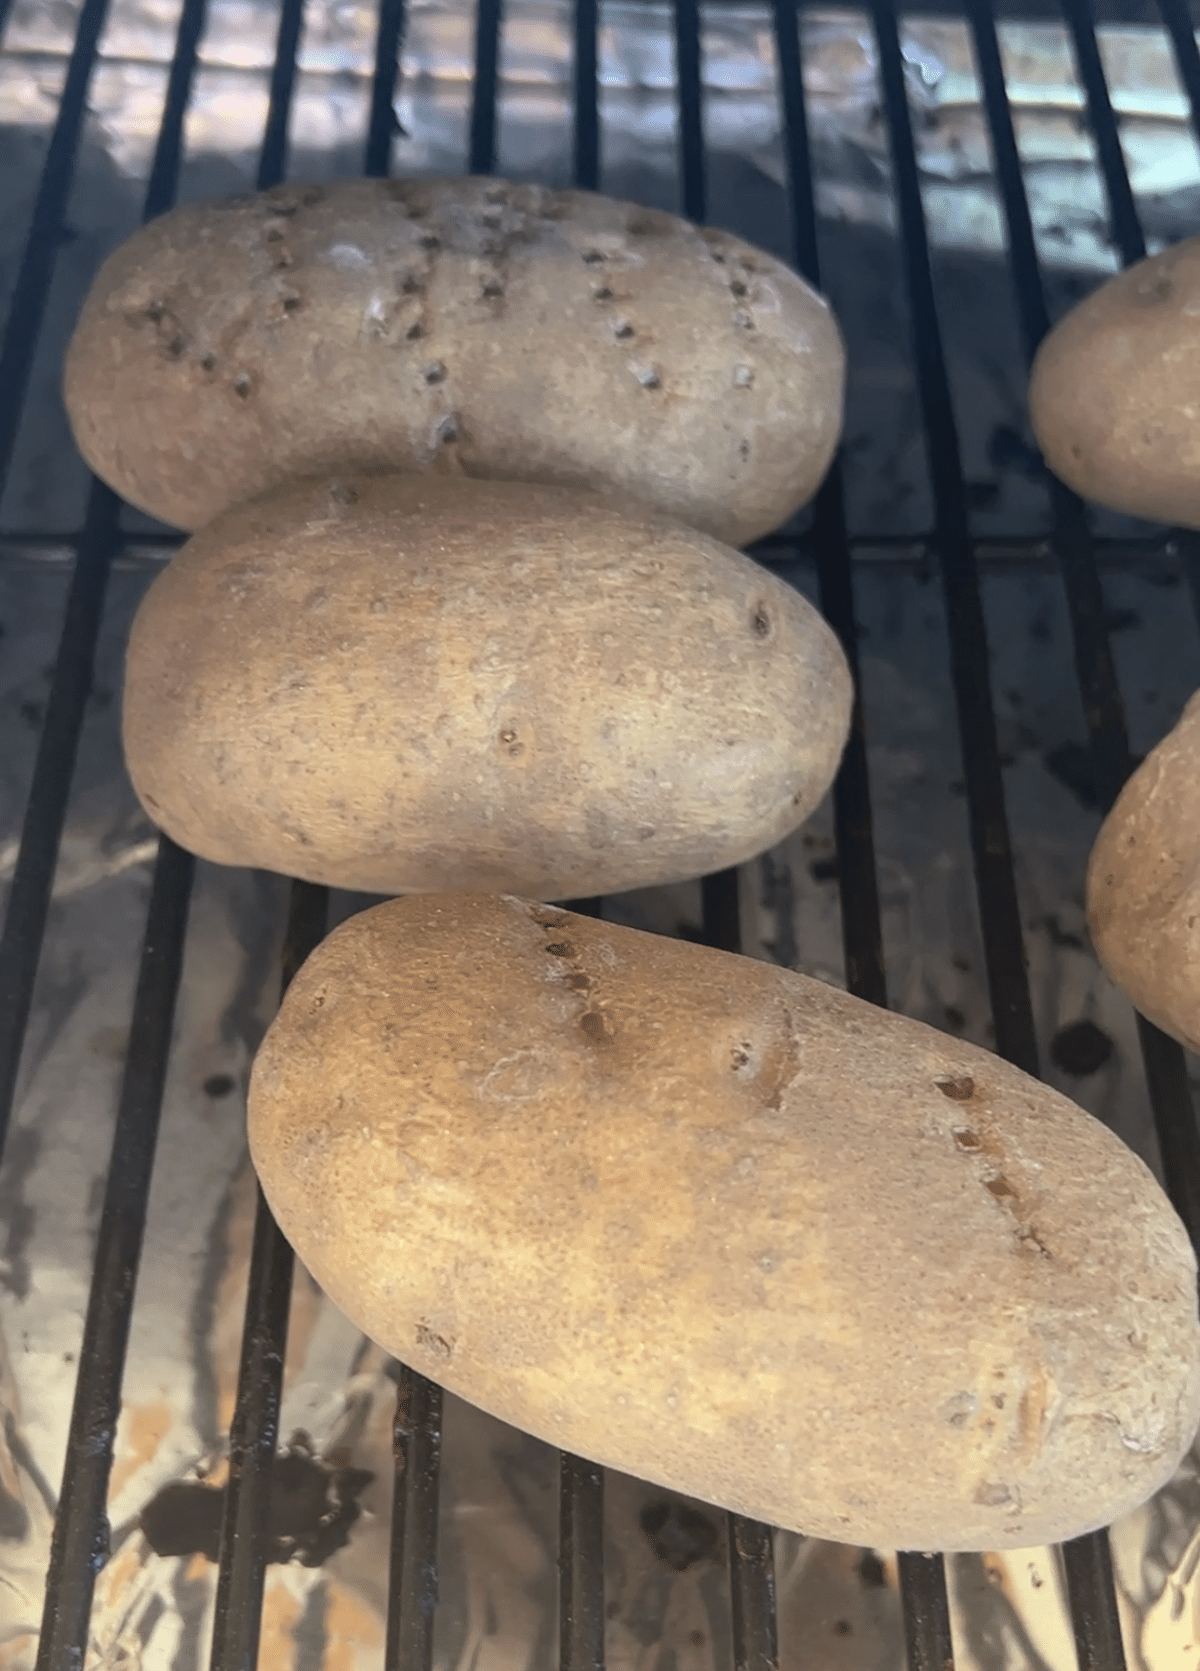 Baked Potatoes on a grill.